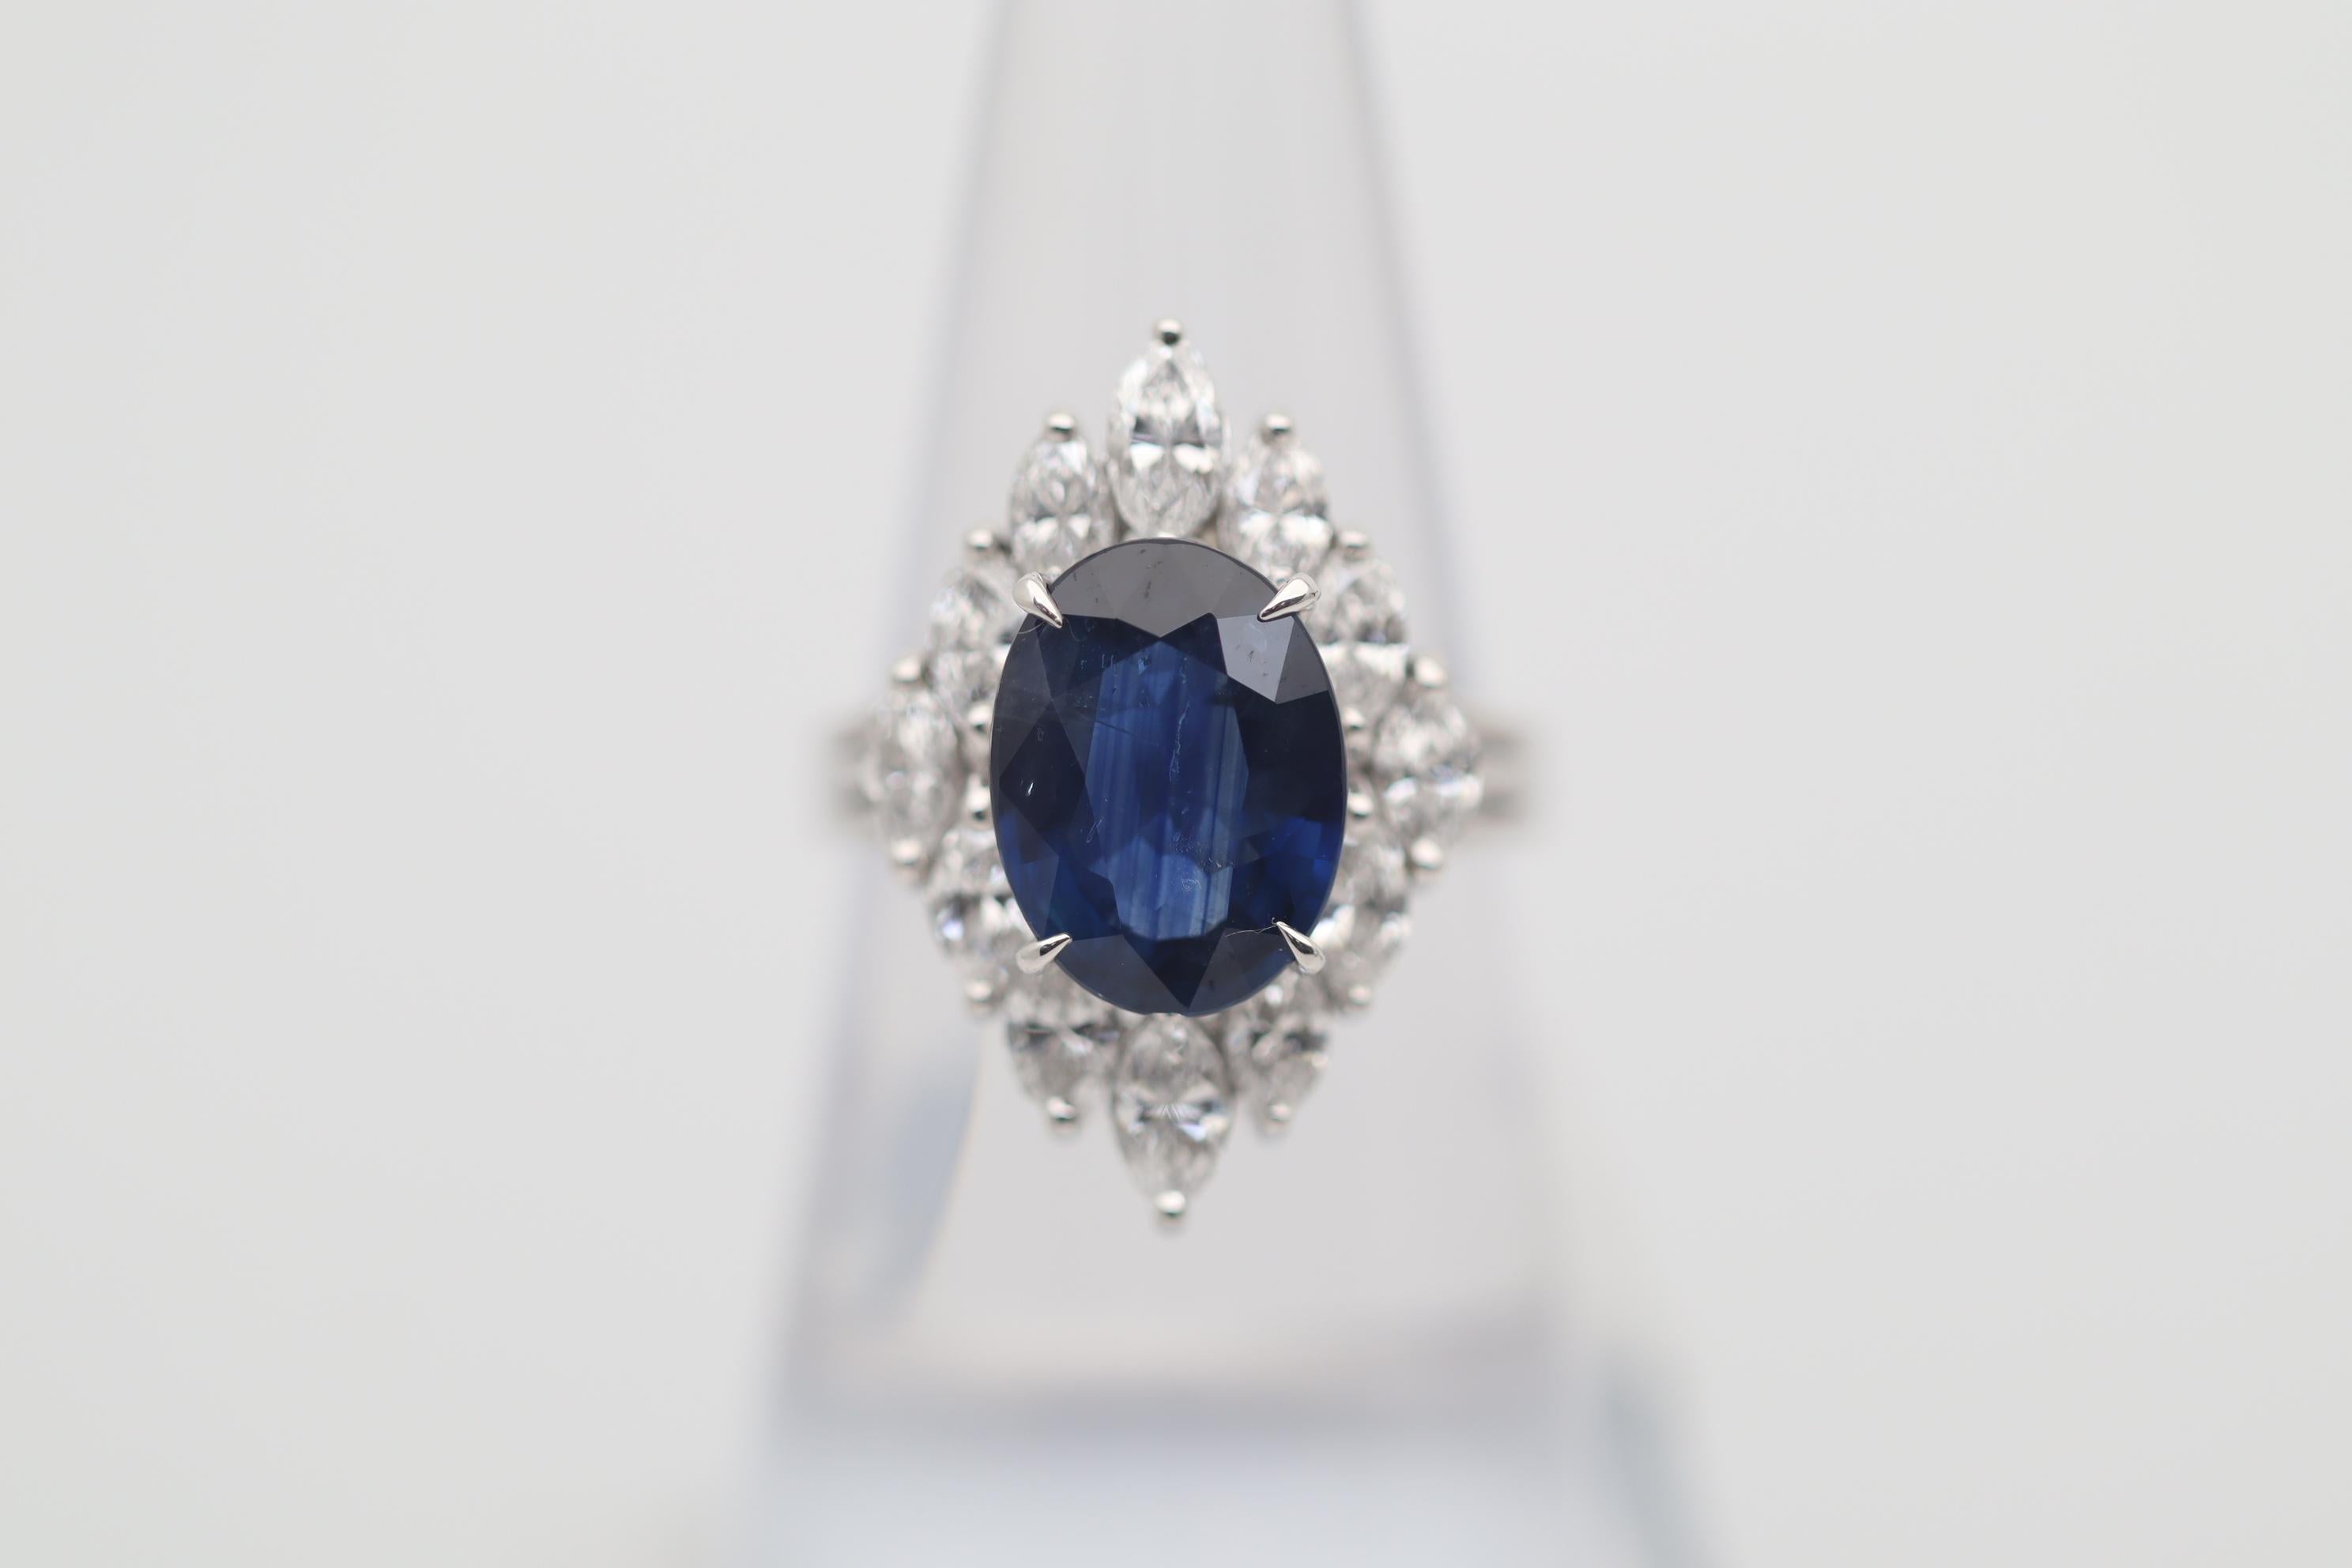 A fun, stylish and chic ring featuring a 4.77 carat natural blue sapphire! It has a lovely oval shape along with a rich blue color. It is accented by 1.68 carats of large marquise shape diamonds which are set around the sapphire giving the ring a